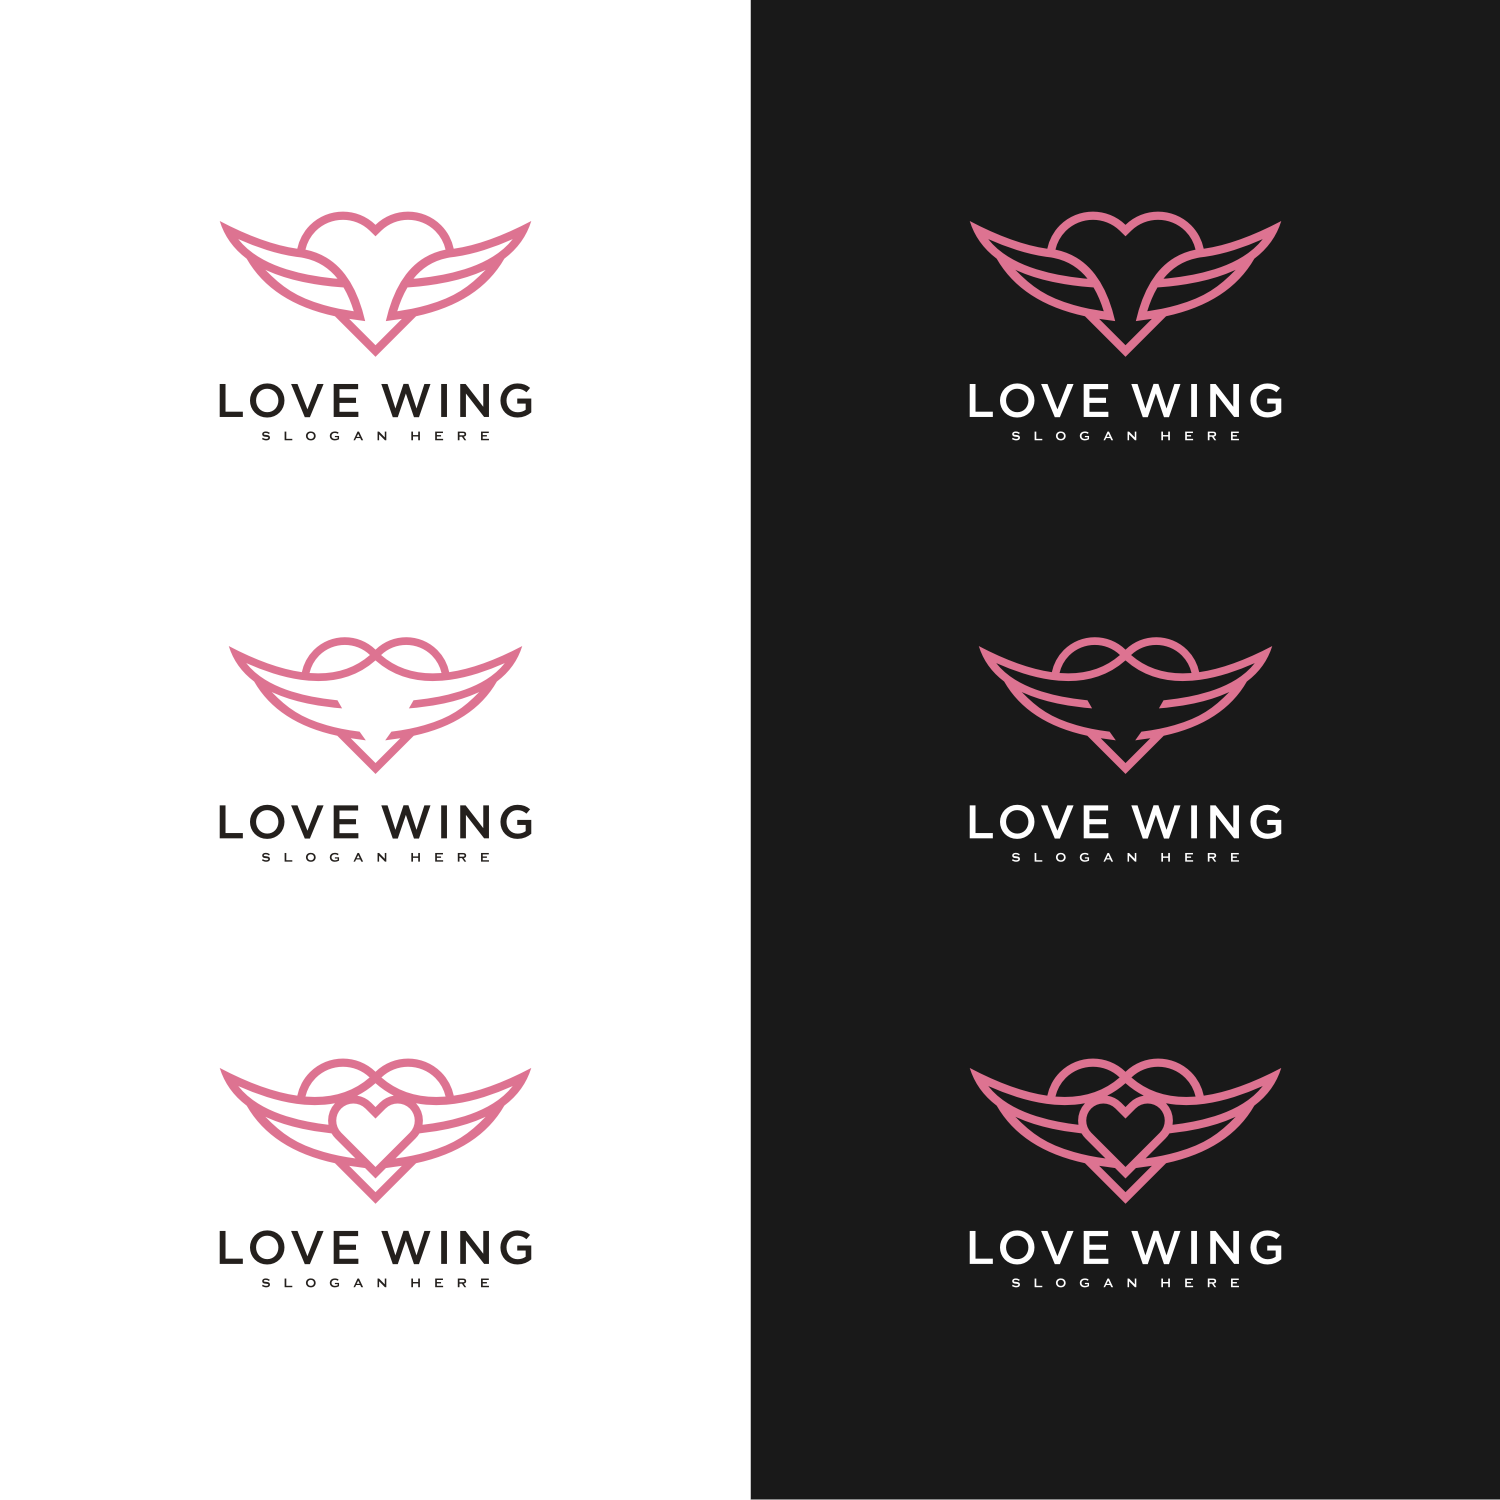 Love Wing Logo Vector Design Line Style cover image.